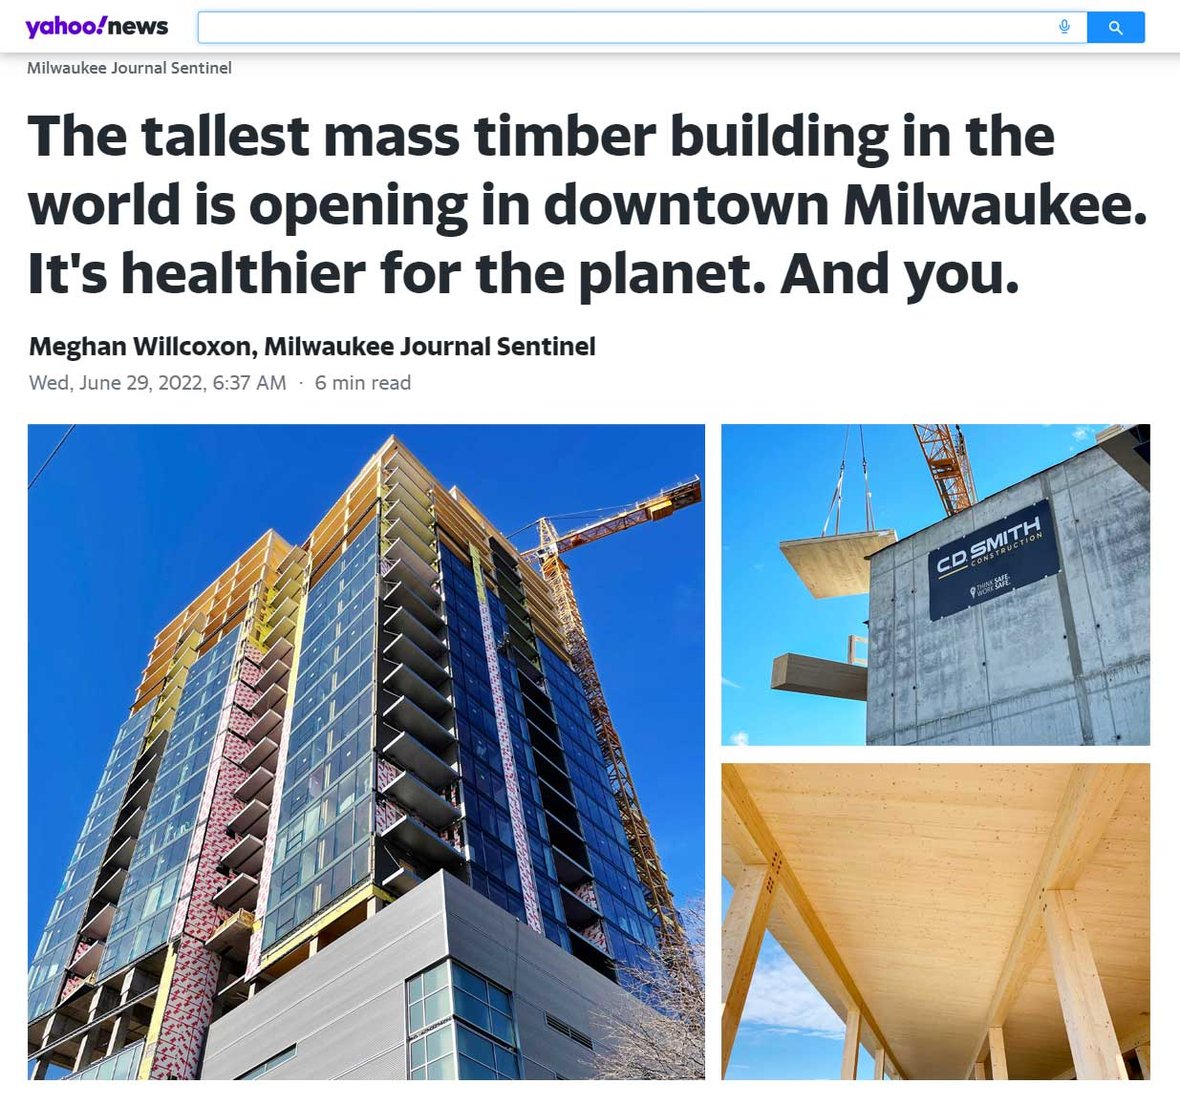 C.D. Smith Construction Building Ascent Mass Timber Tower in Milwaukee, Wisconsin